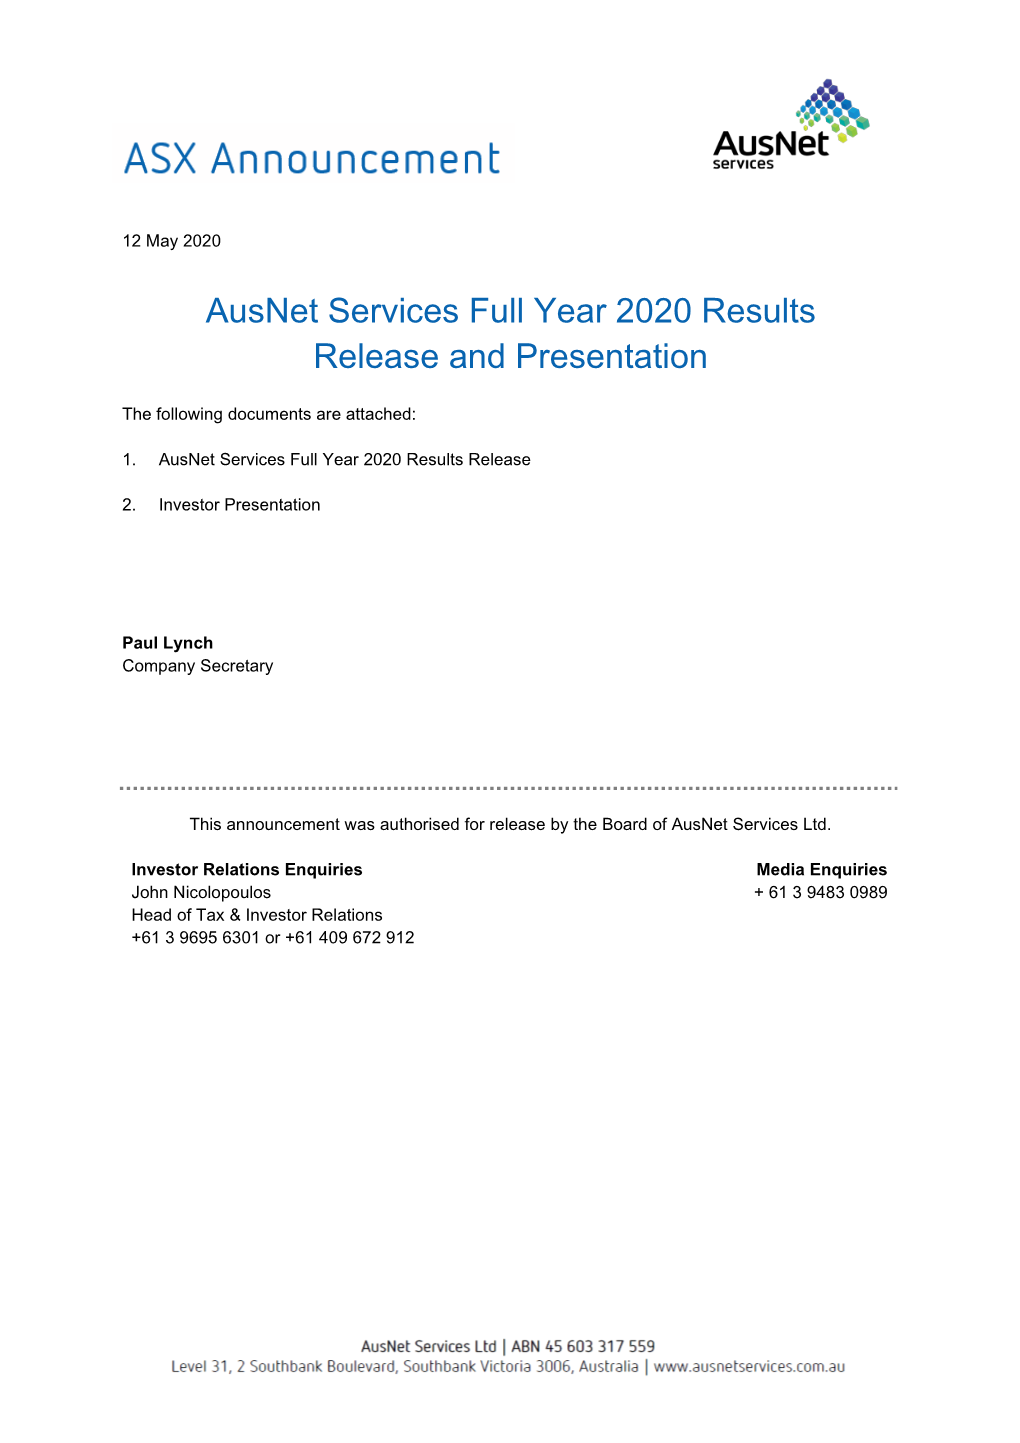 Ausnet Services Full Year 2020 Results Release and Presentation